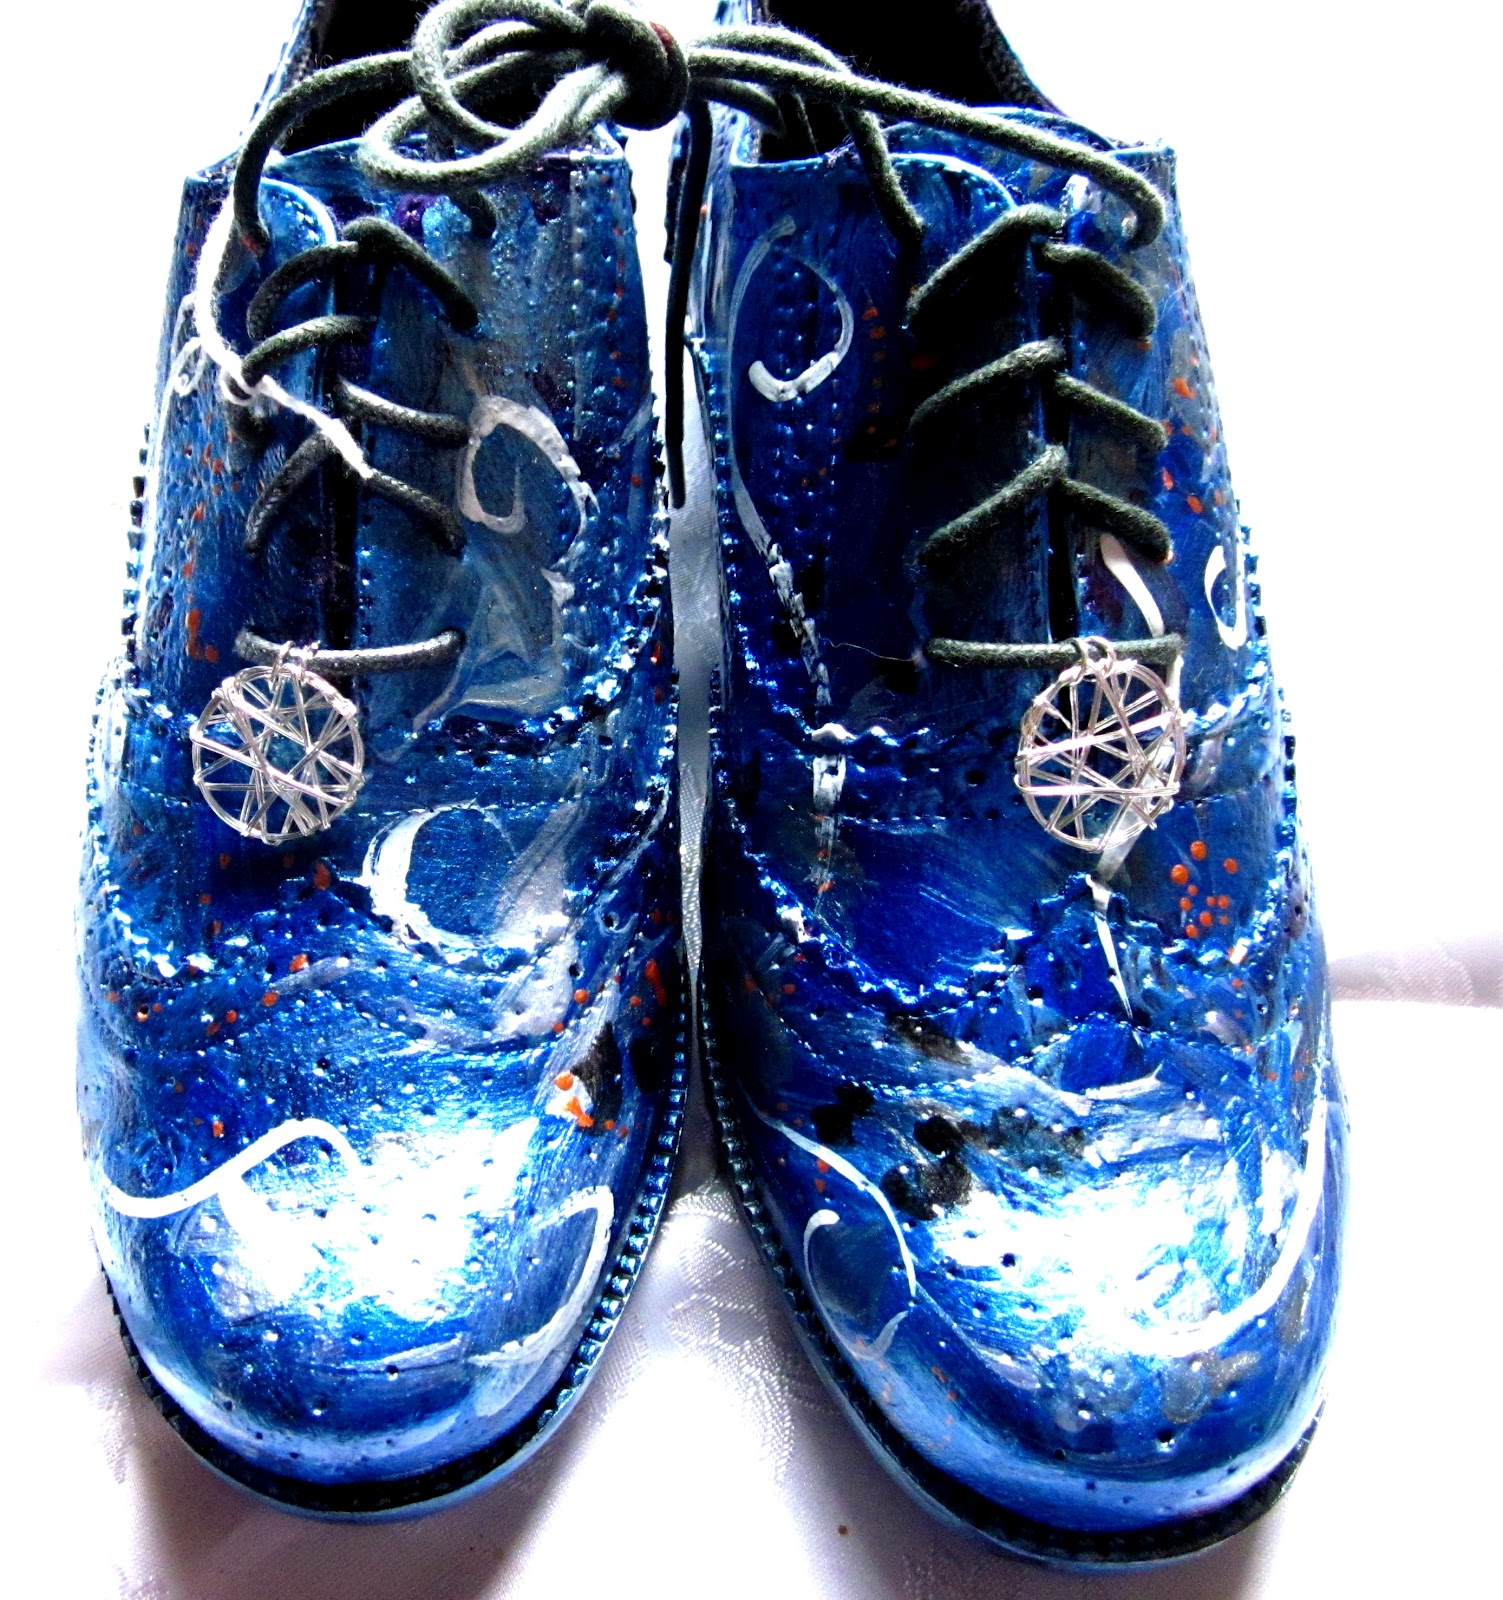 Custom Shoes With Style: Blue painted shoes